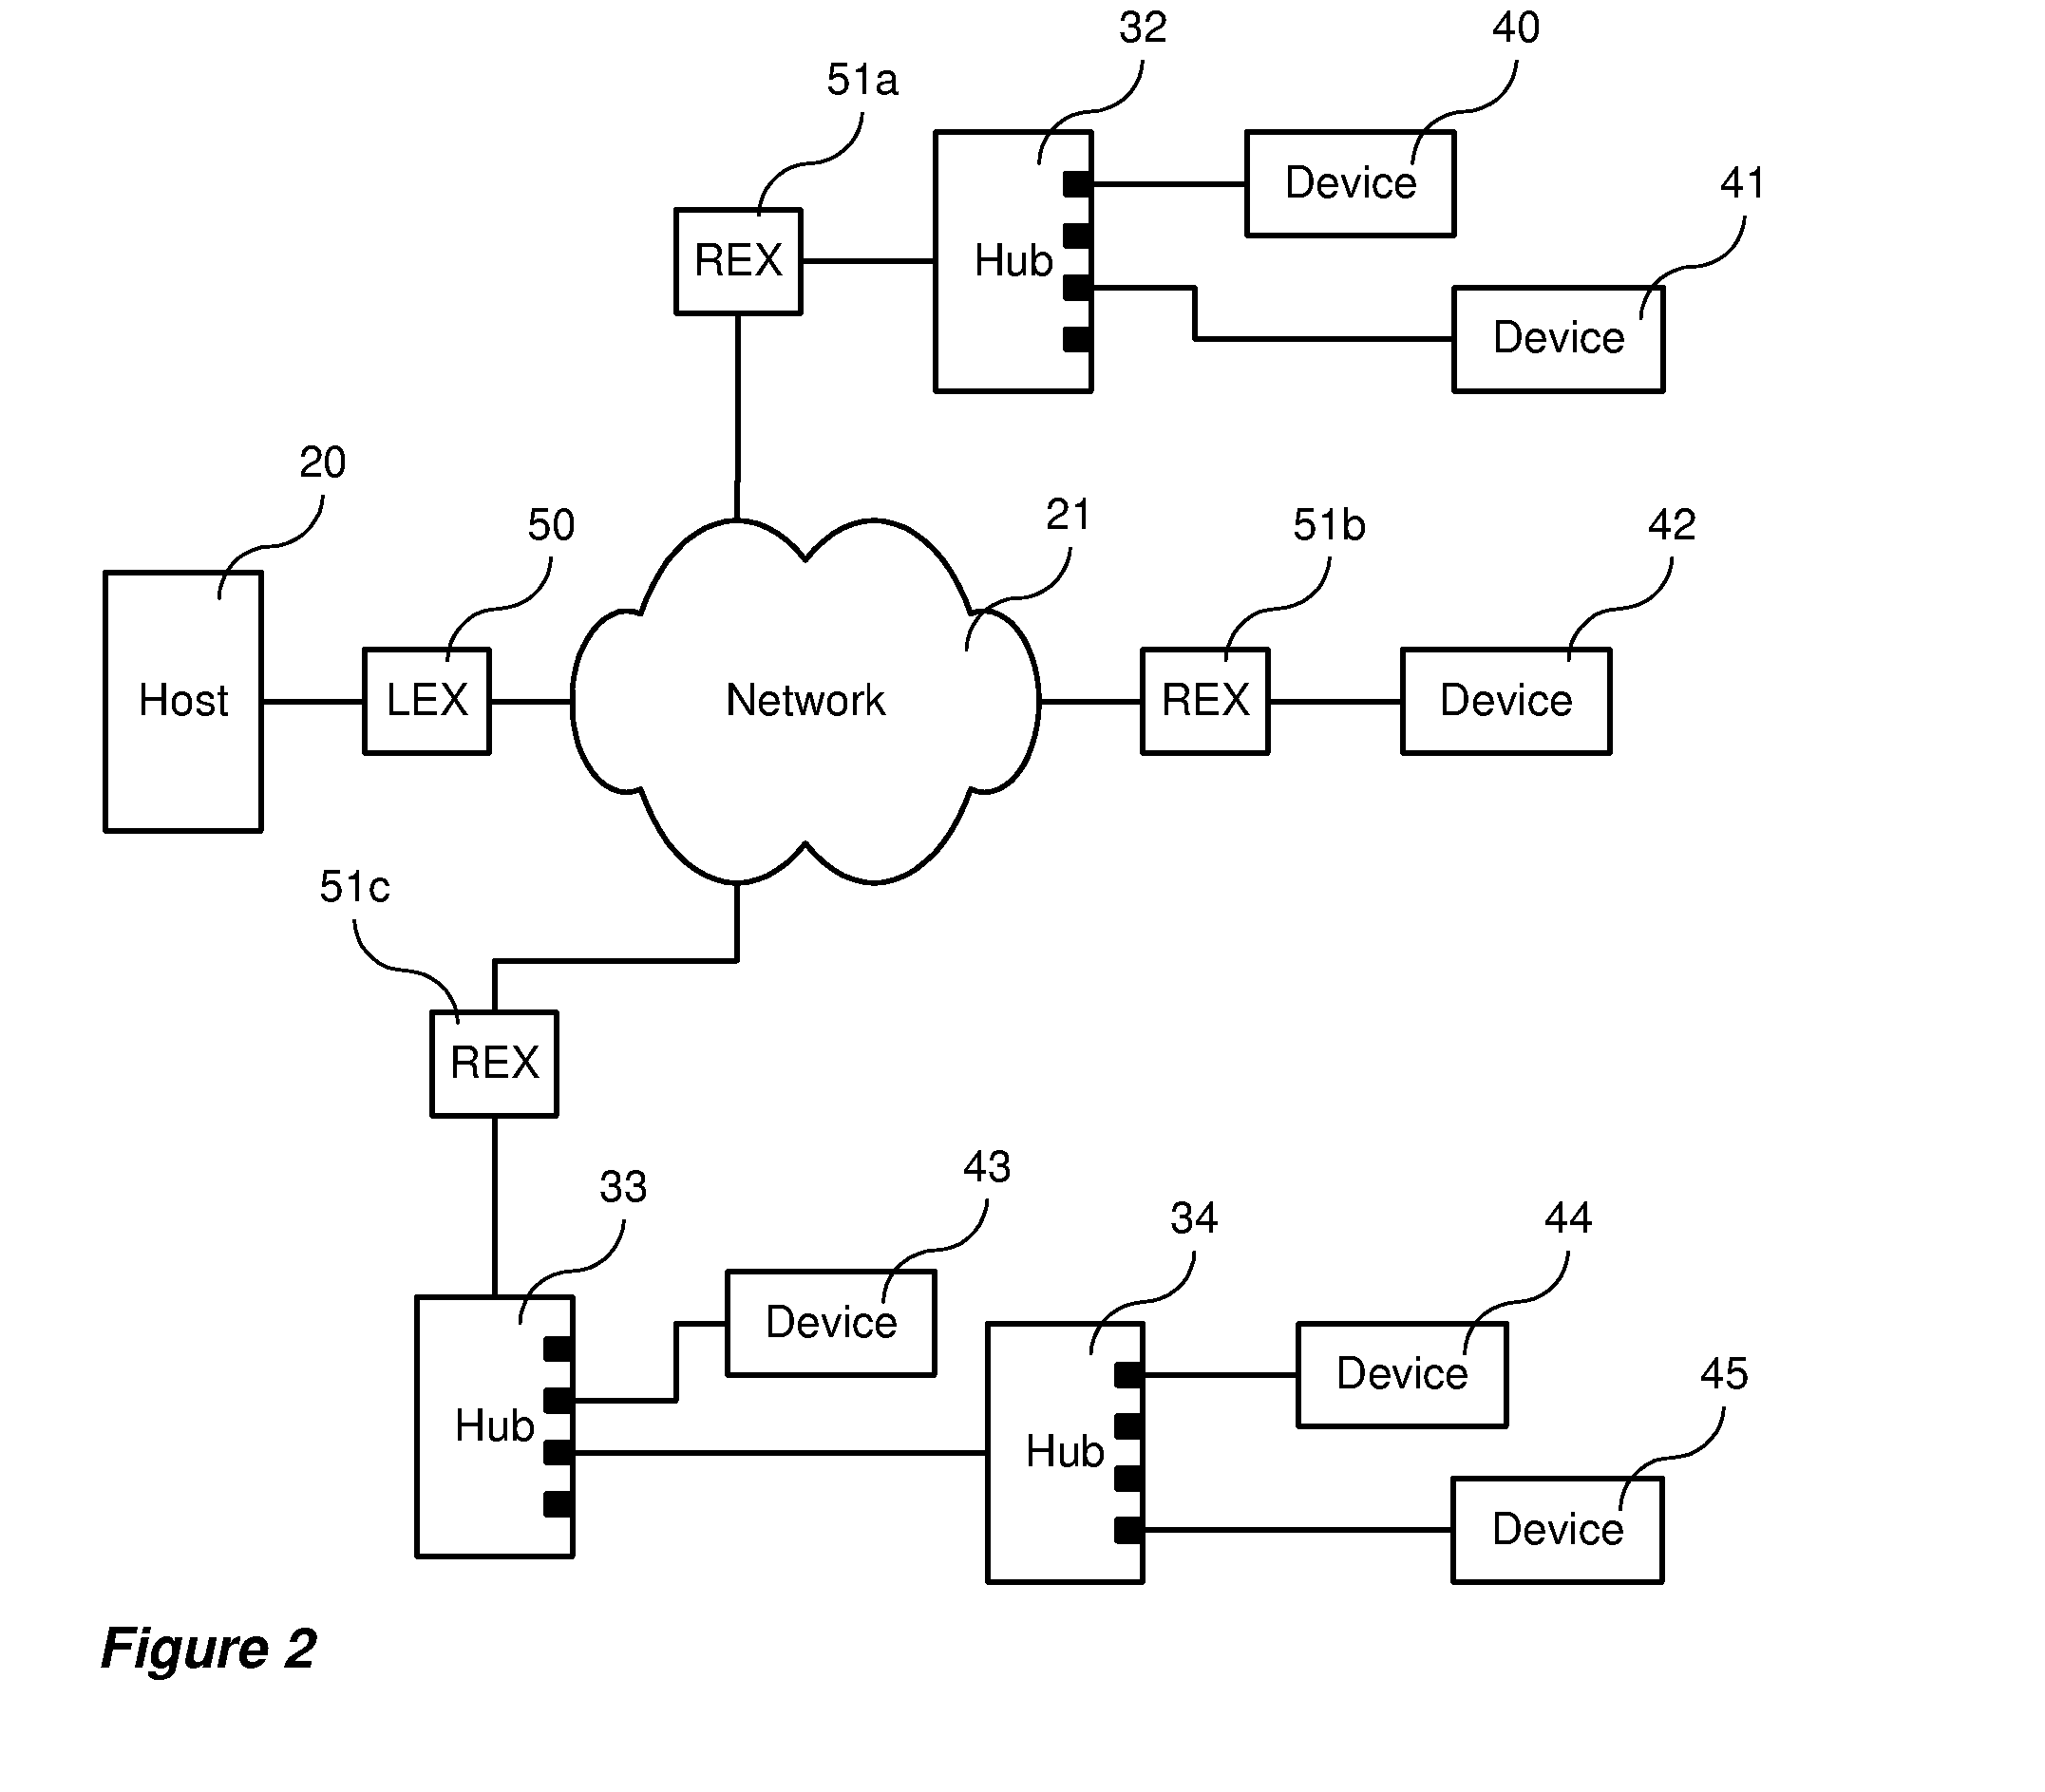 Method and Apparatus for Distributing USB Hub Functions across a Network